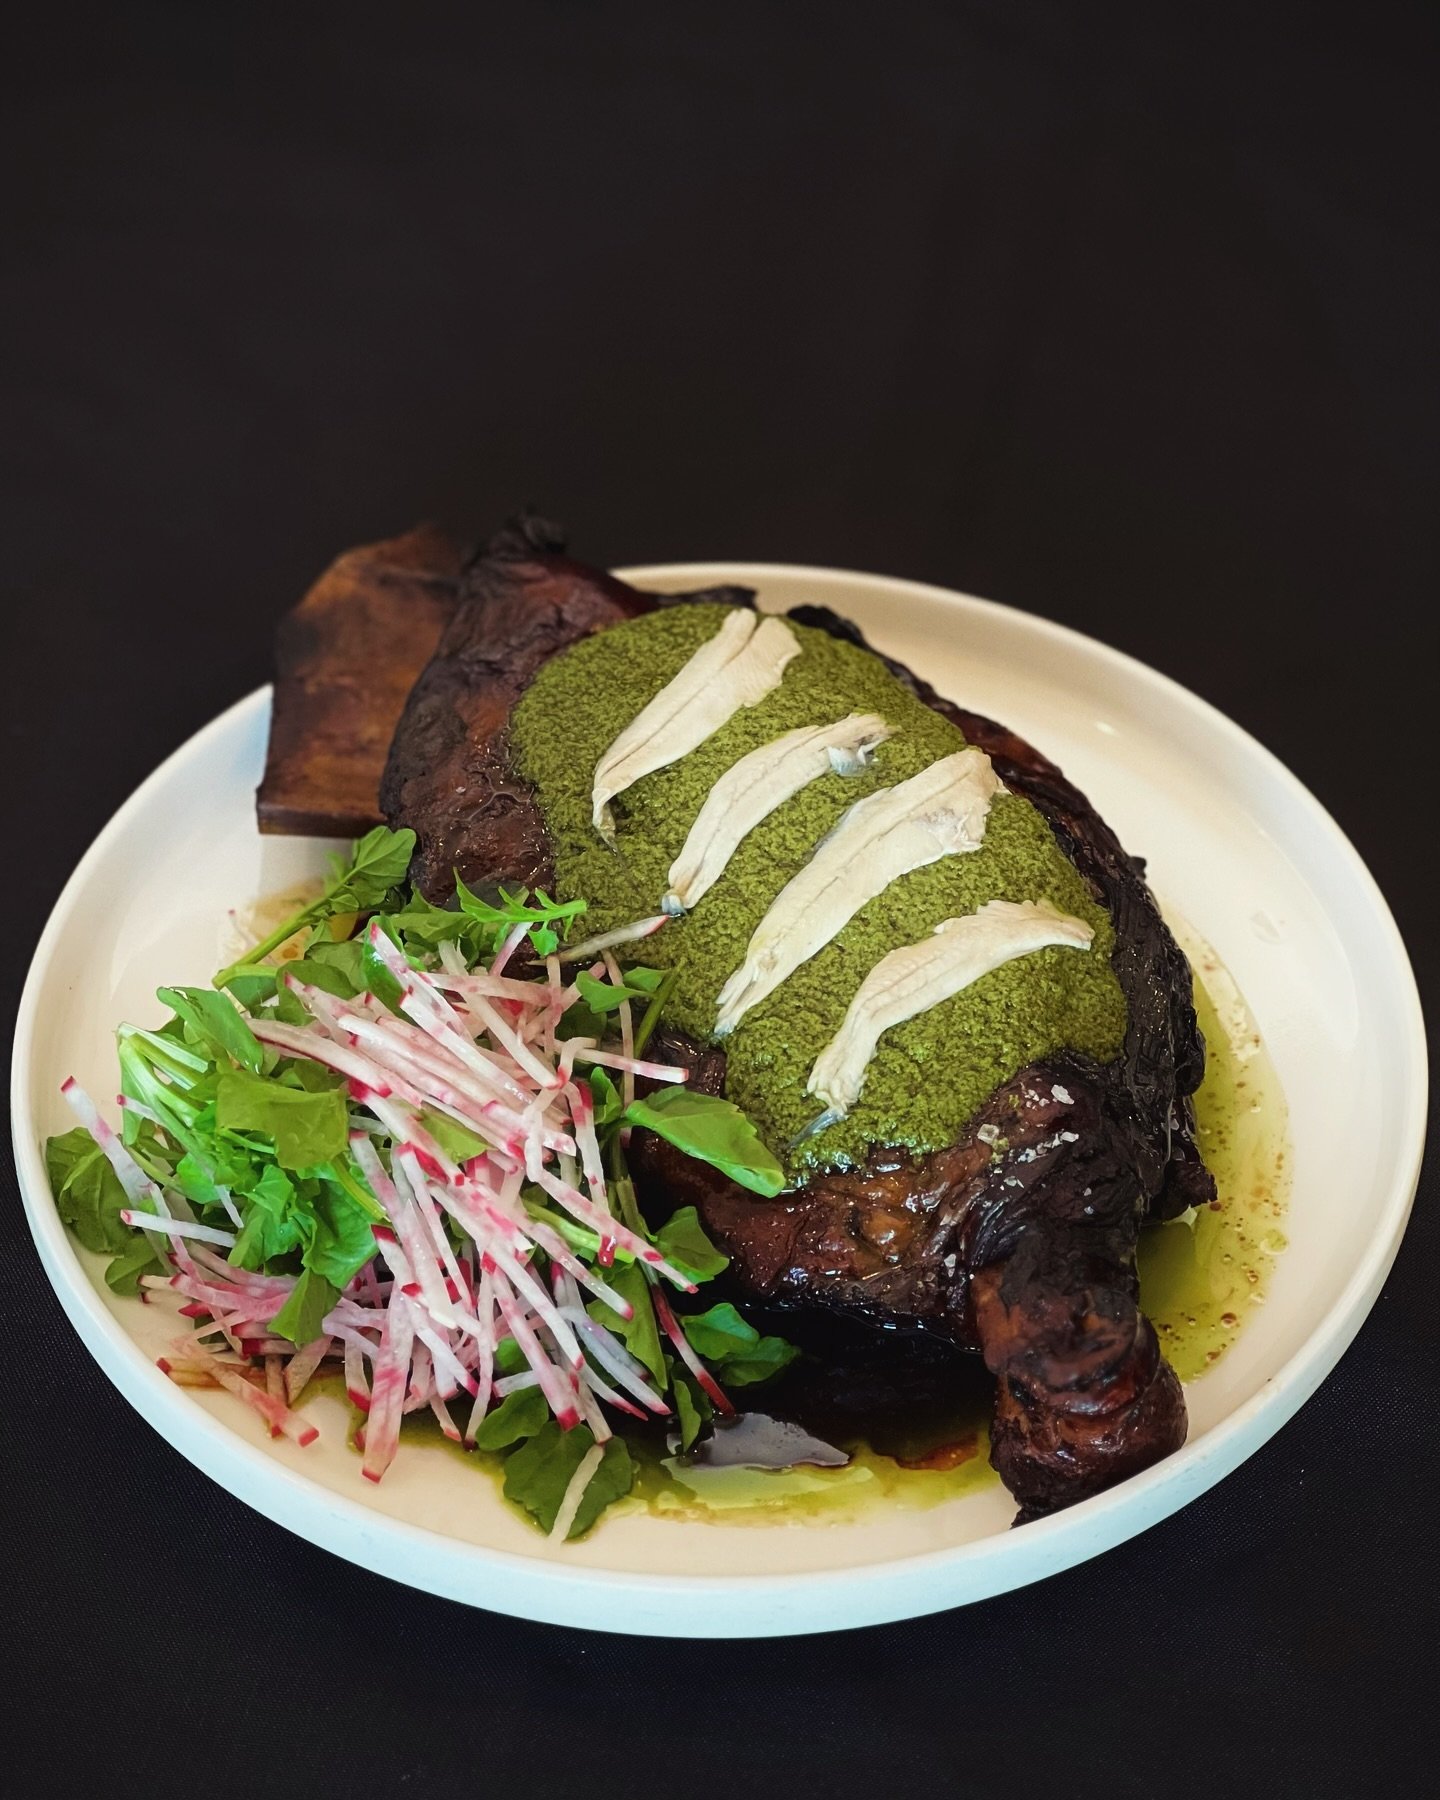 Smoked &amp; Braised Lamb Shoulder 
Salsa Verde / White Anchovies / Watercress / Radish / Jus
A large plate option on our current a la carte menu. 
Warm up with a lamb shoulder this weekend, to book a spot with us head to our website or contact us vi